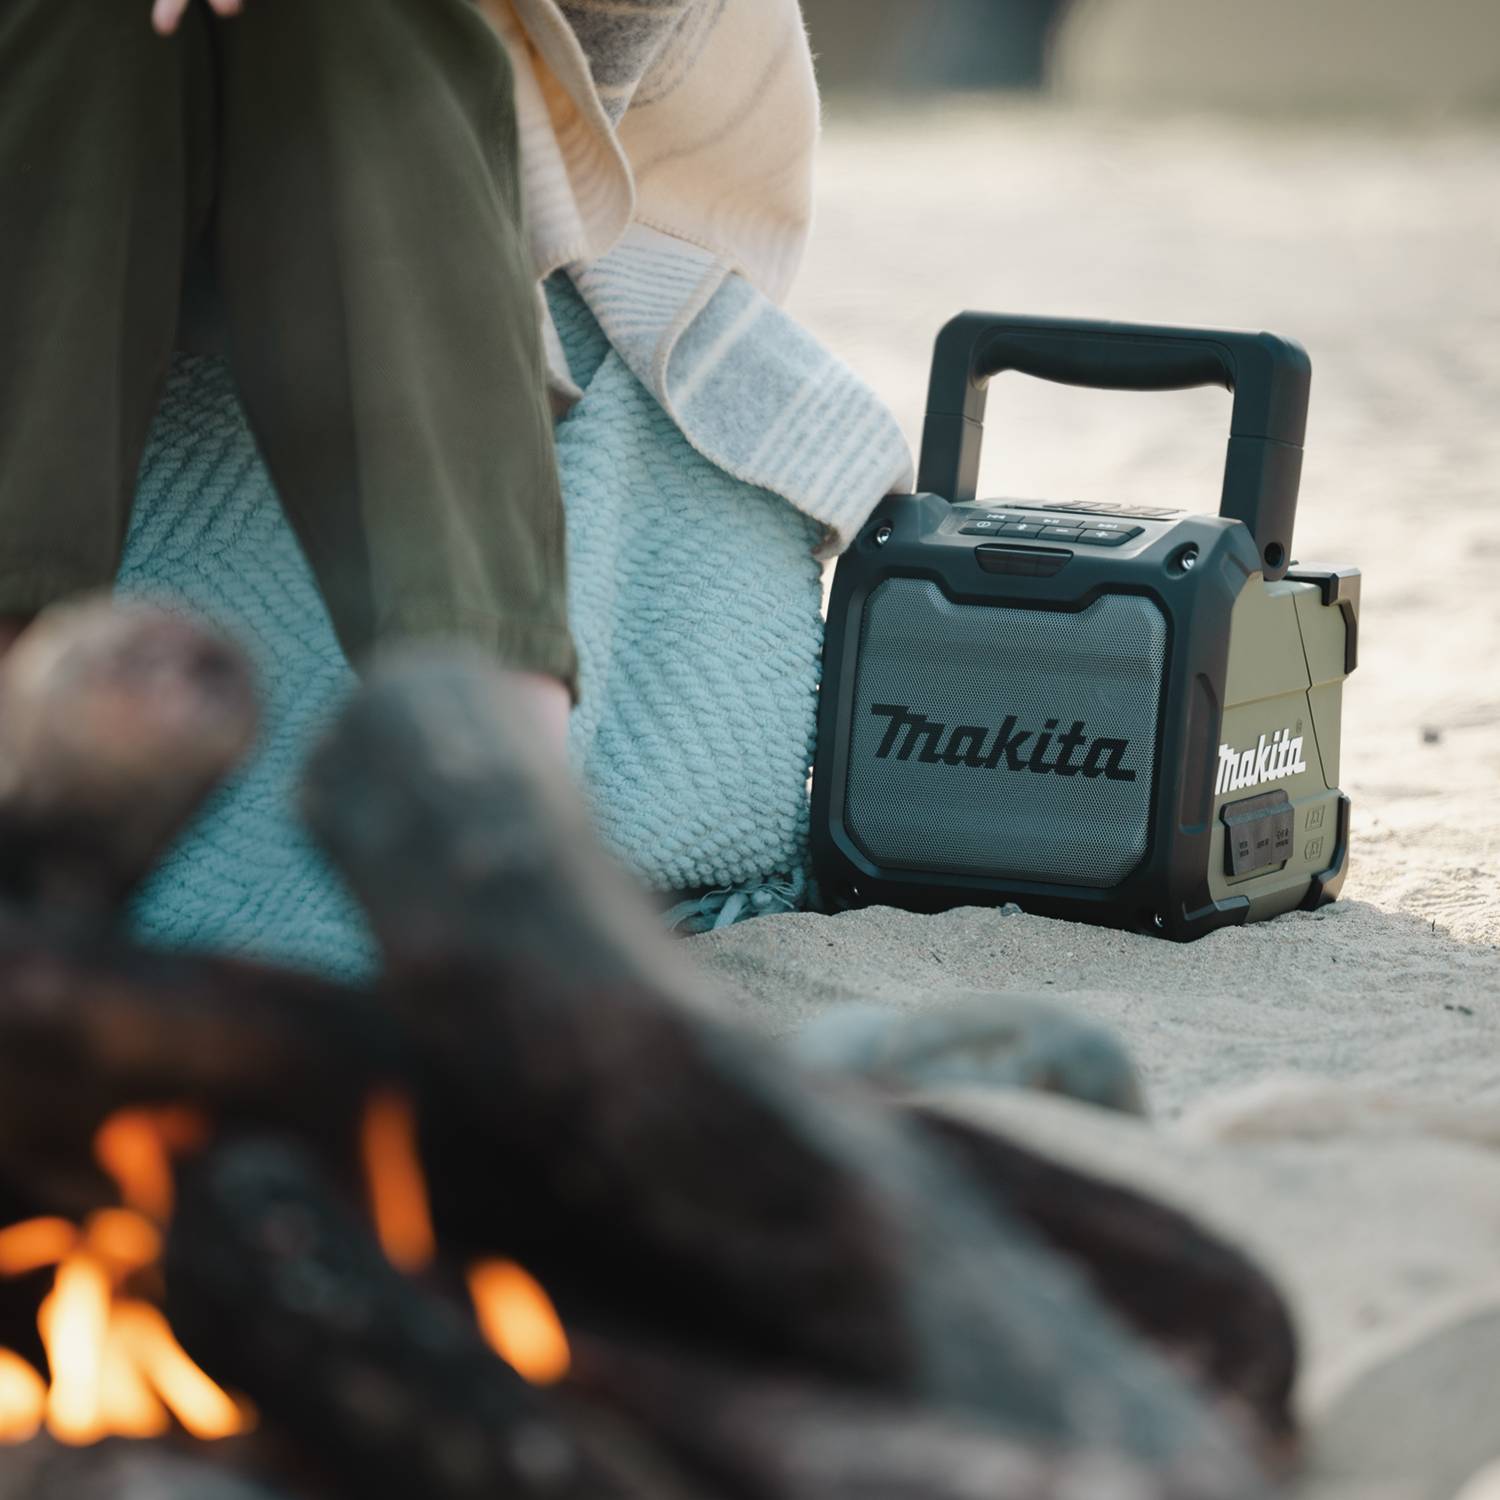 Makita Bluetooth Speaker With Battery And Charger For Sale, 49% OFF